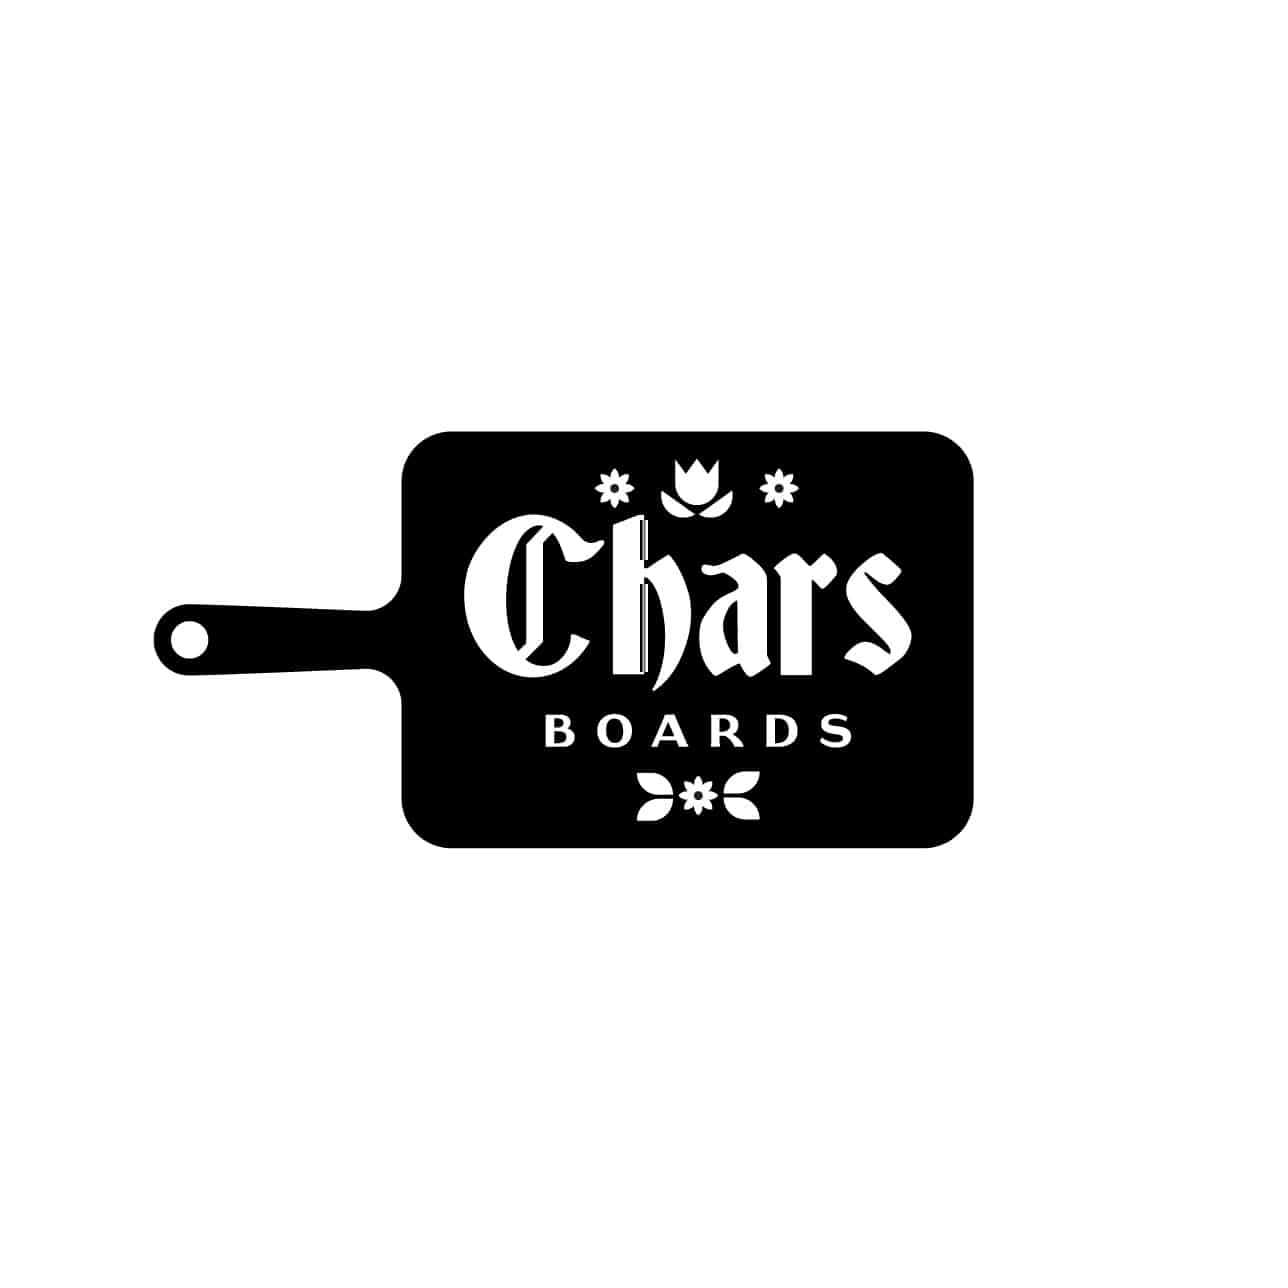 Chars Boards Logo for Charcuterie Board Business in Los Angeles of a board with germanic style flower detail